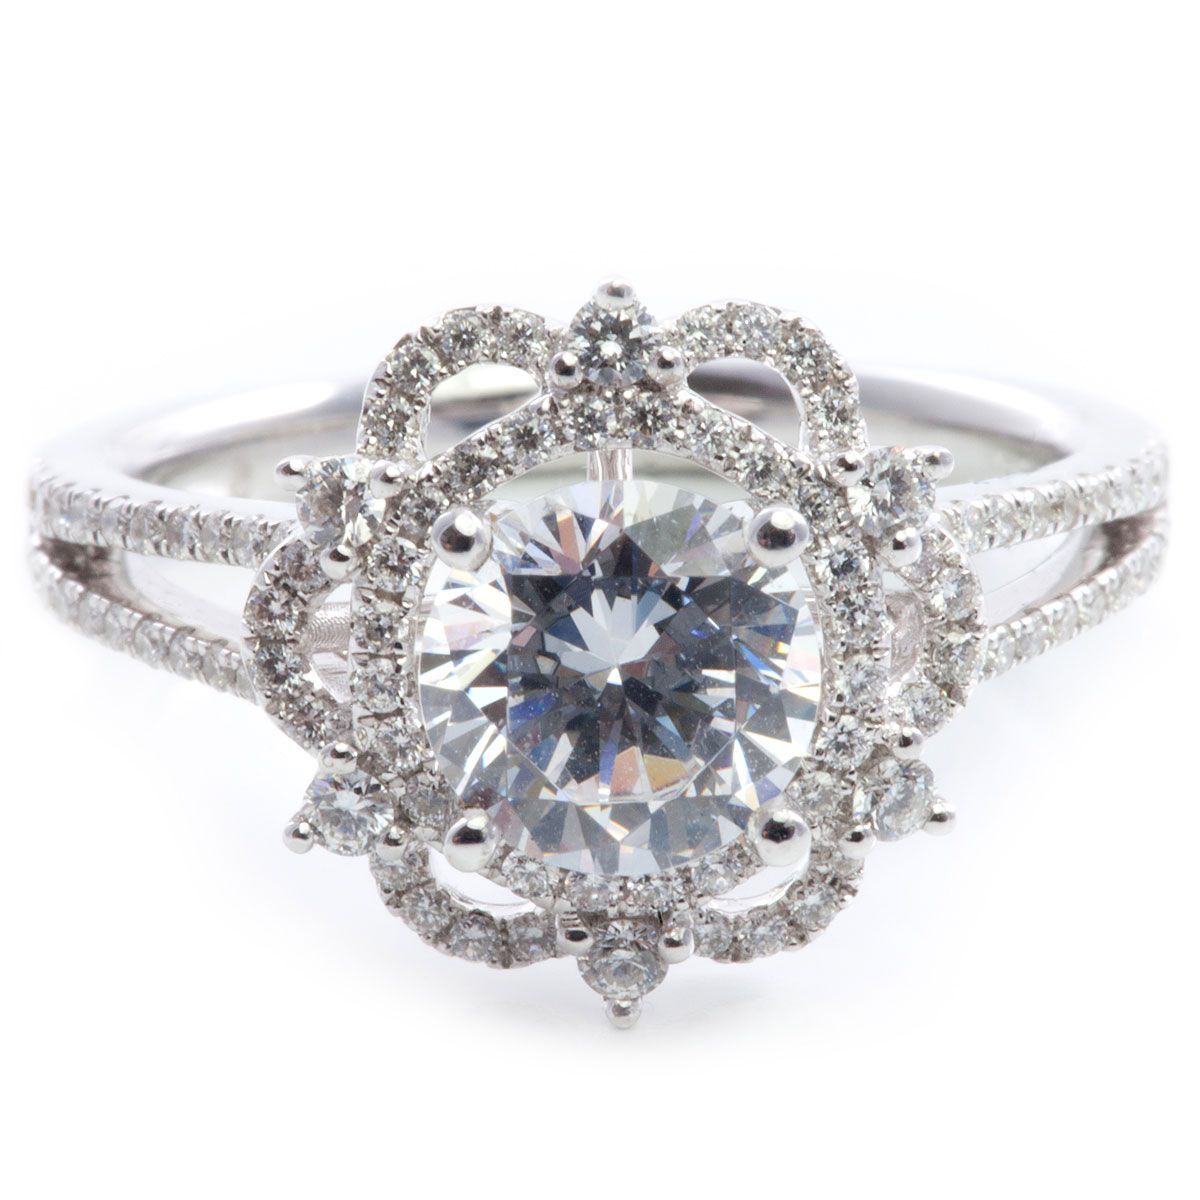 WOW!!! Only in my dreams lol. Vintage inspired 18K white gold engagment ring con